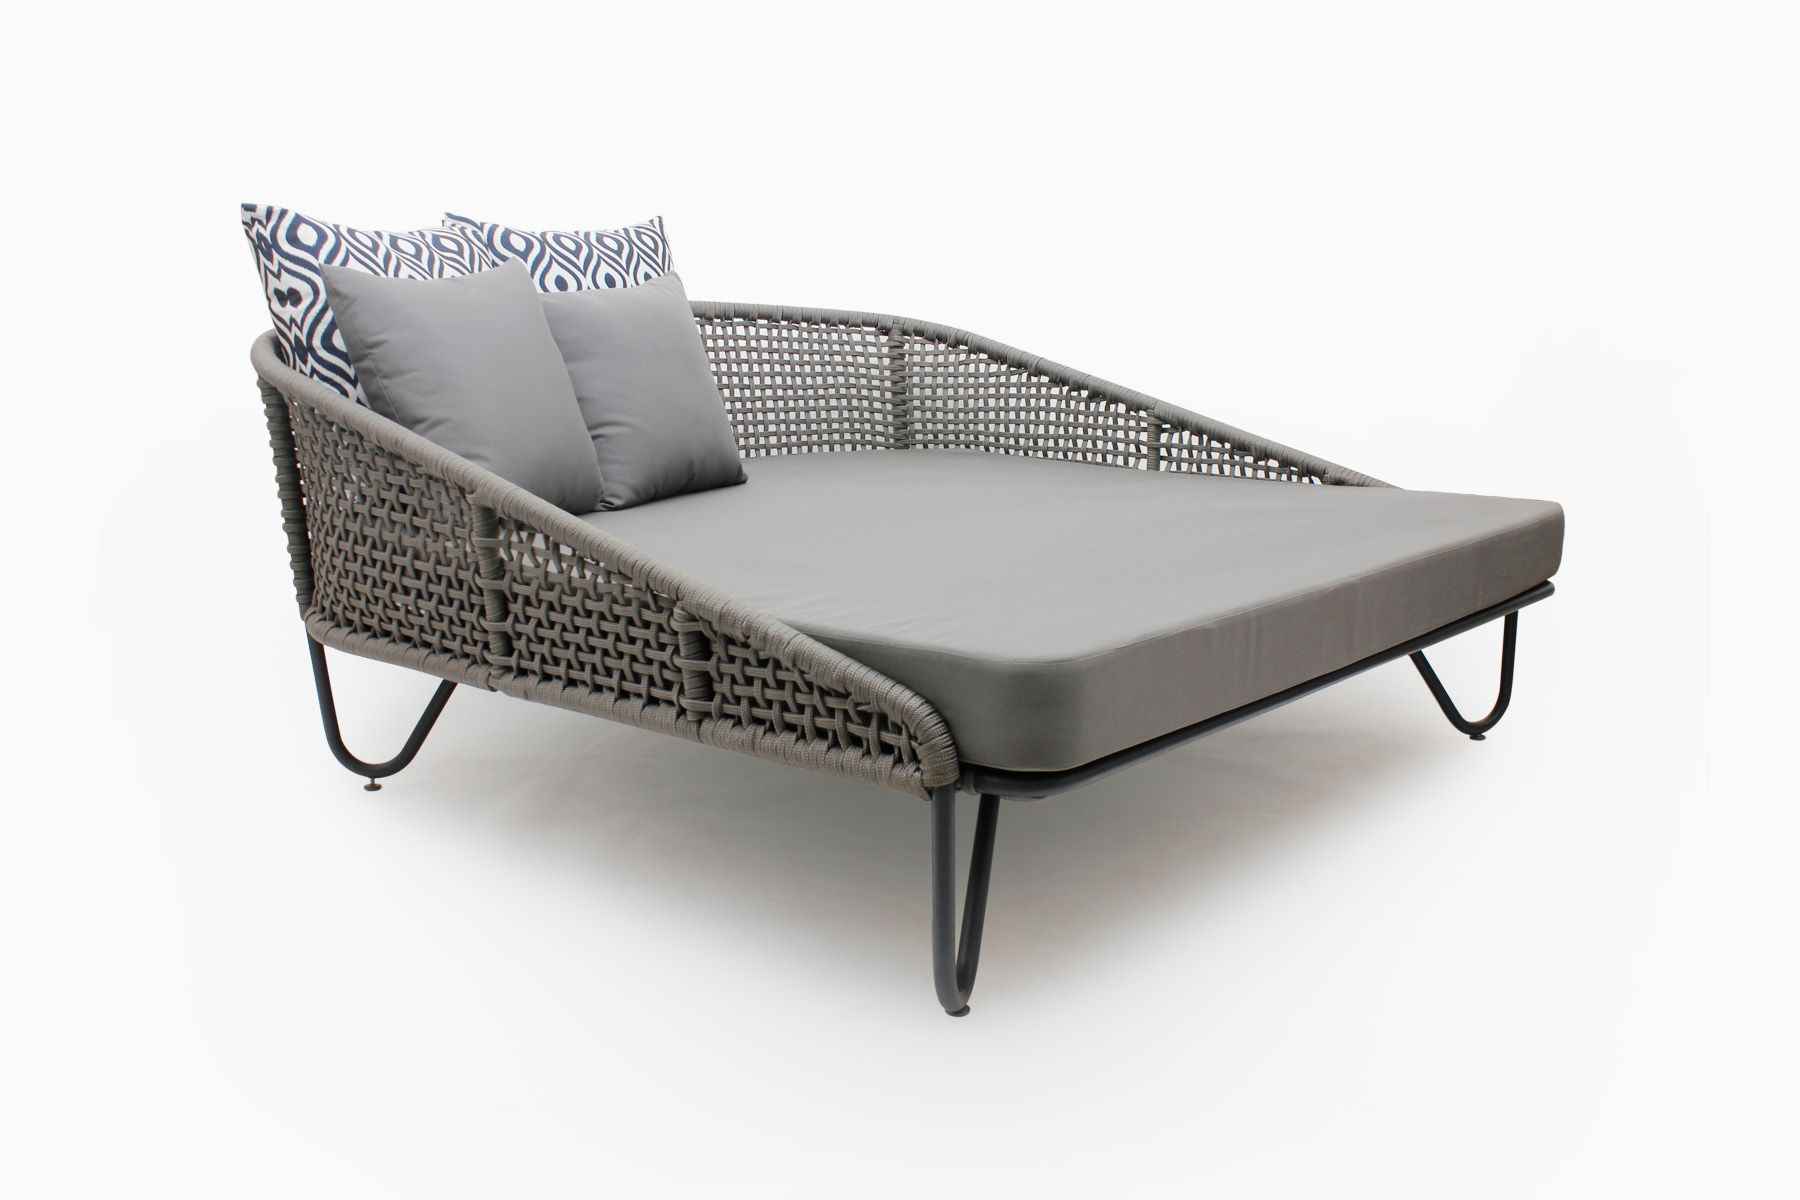 Calen Patio Daybed